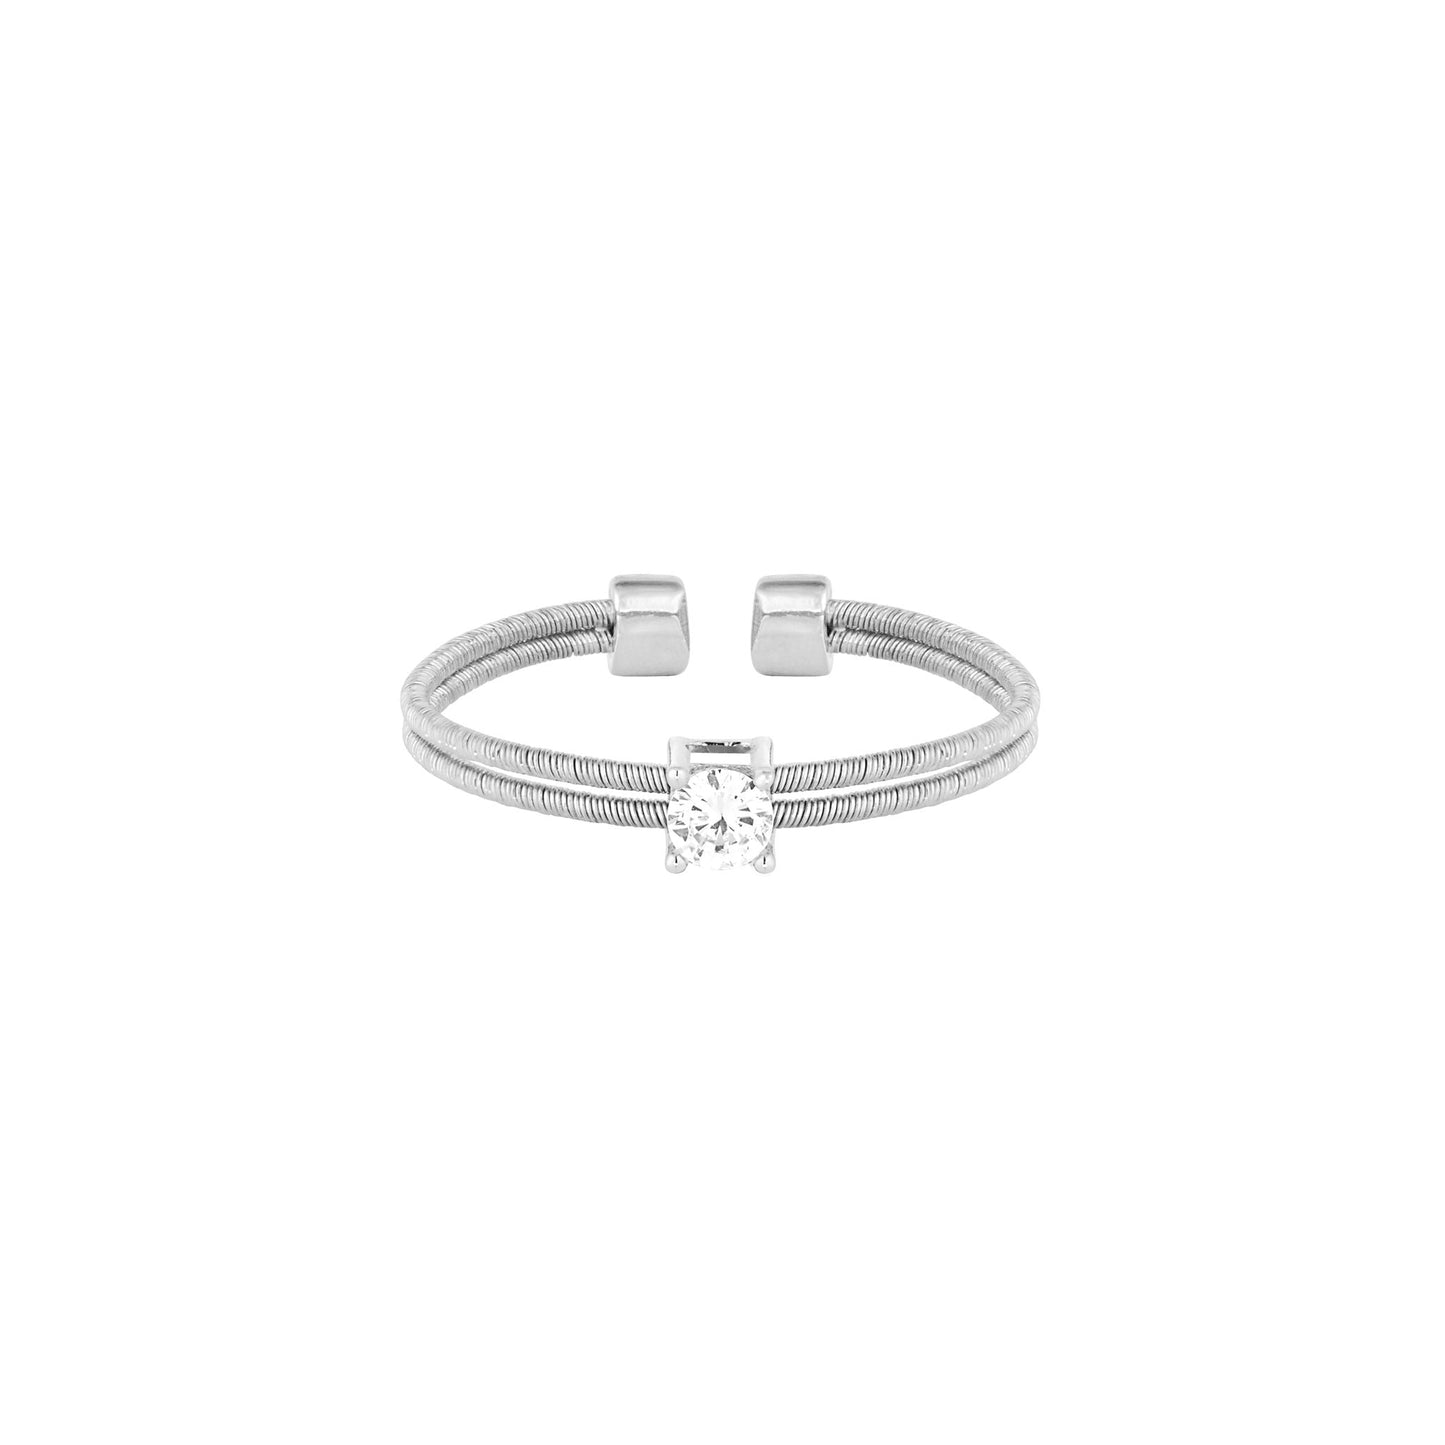 A solitaire flexible cable ring with simulated diamond displayed on a neutral white background.